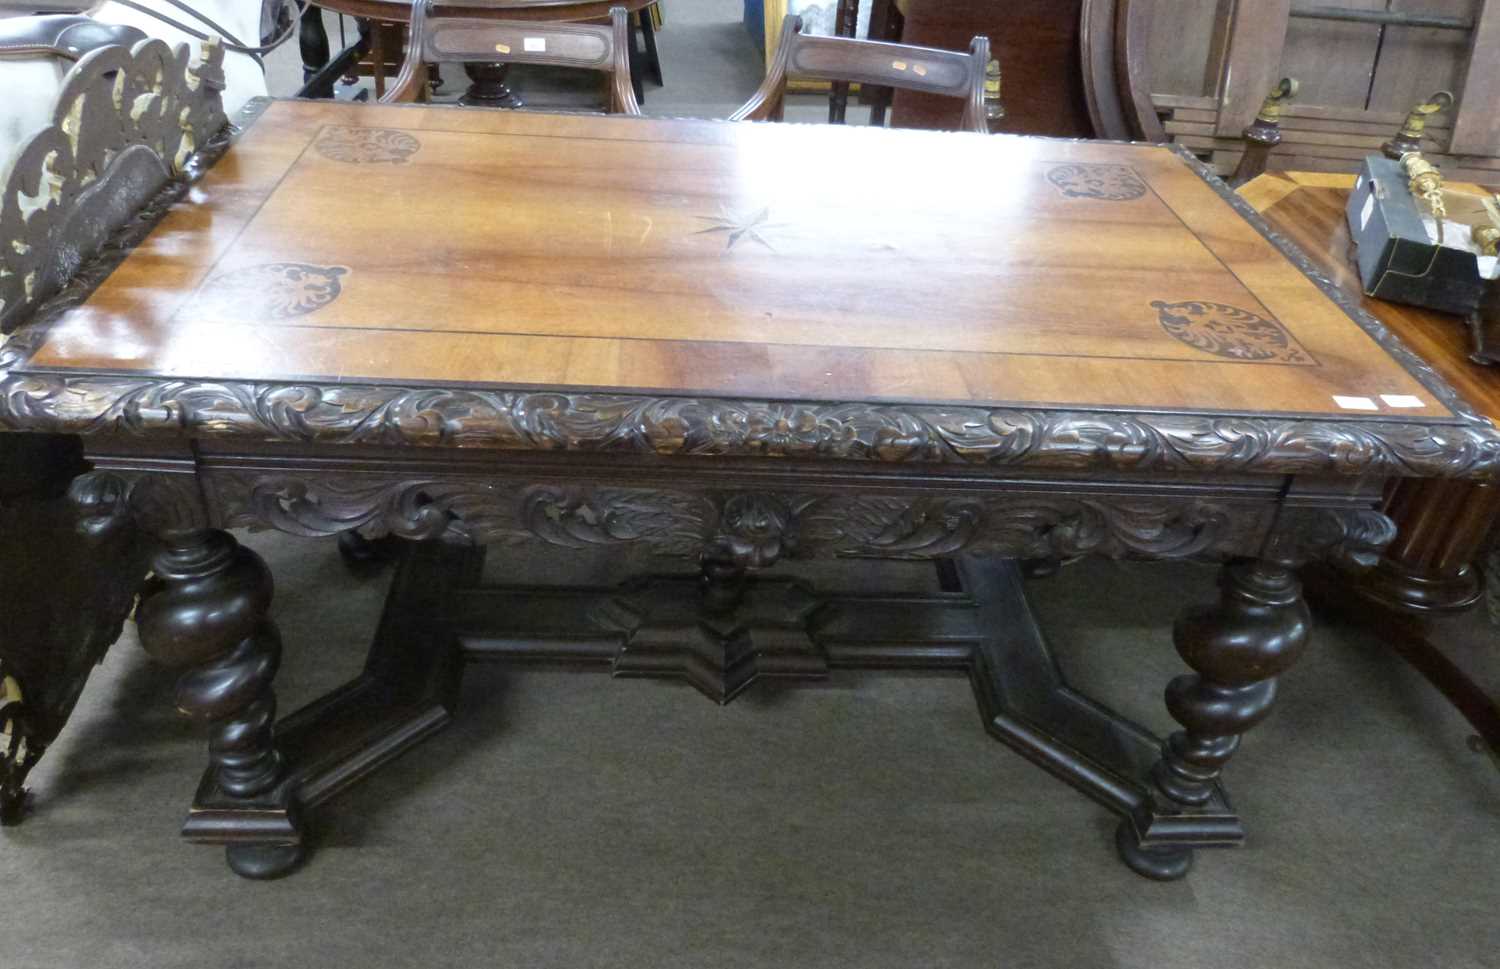 A 19th Century central European writing table or desk with two freize drawers, inlaid top with